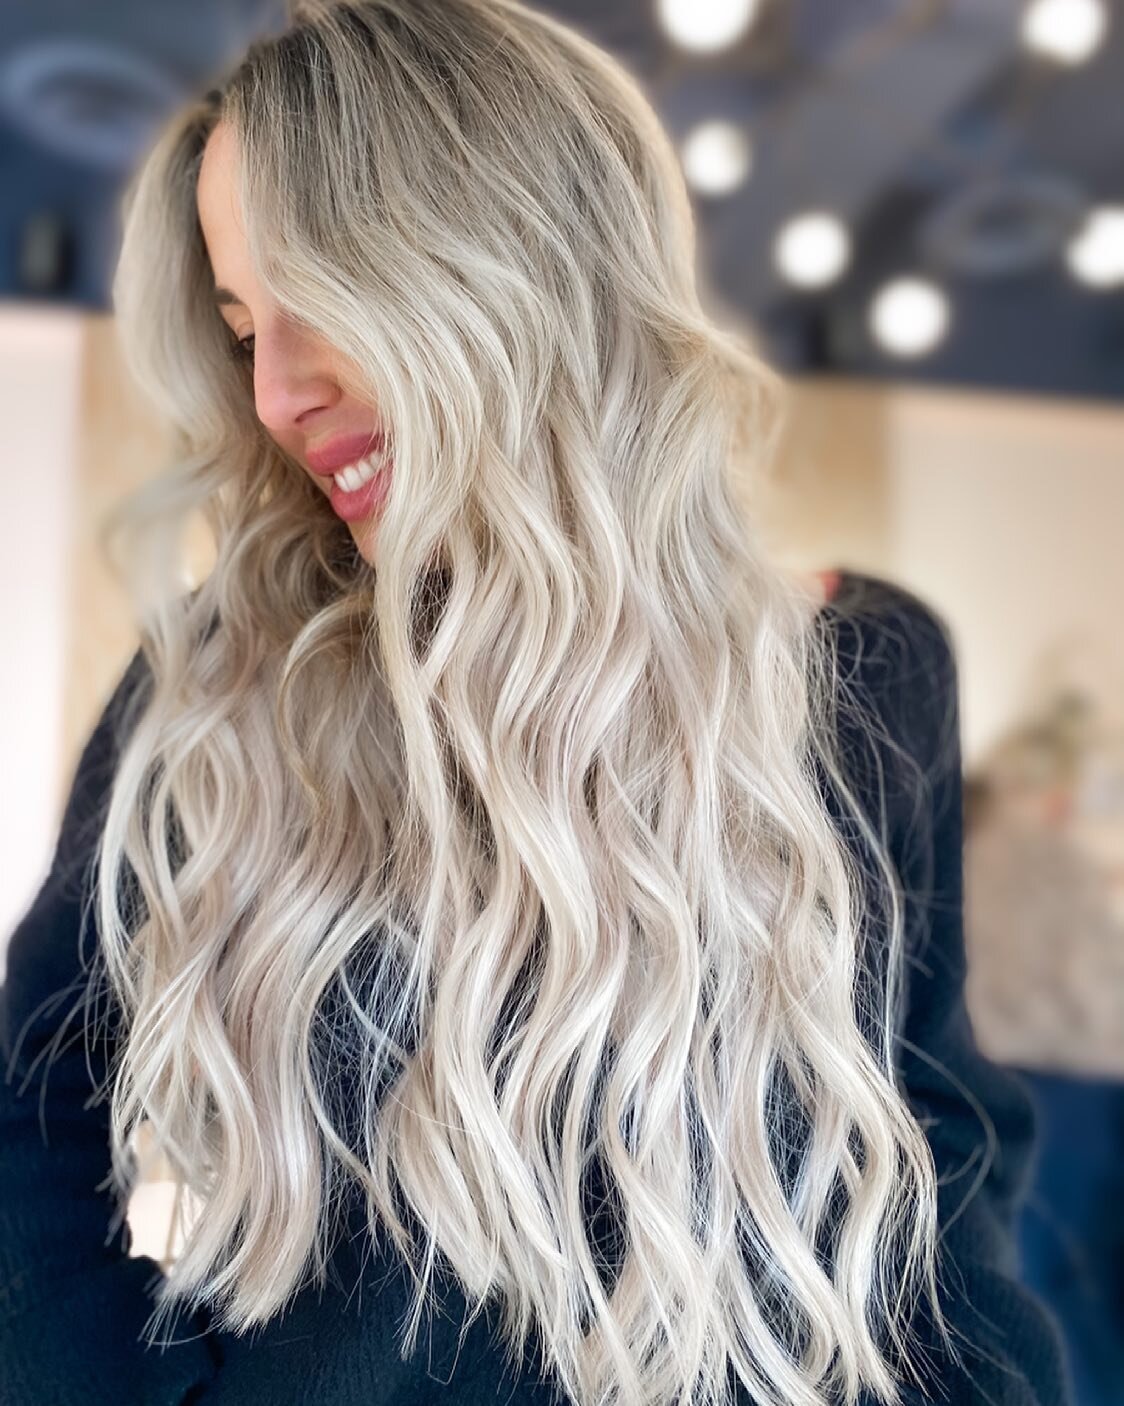 My favourite Rose ❤️💗

&bull;
22&rsquo; #habithandtiedextensions for this babe 😍
@habithairx @habitextensionmethod @habitsalon

&bull;
&bull;

#habithandtiedextensions #habithandtiedwefts #habithandtied #habithandtiedcertified #habithandtiedextensi